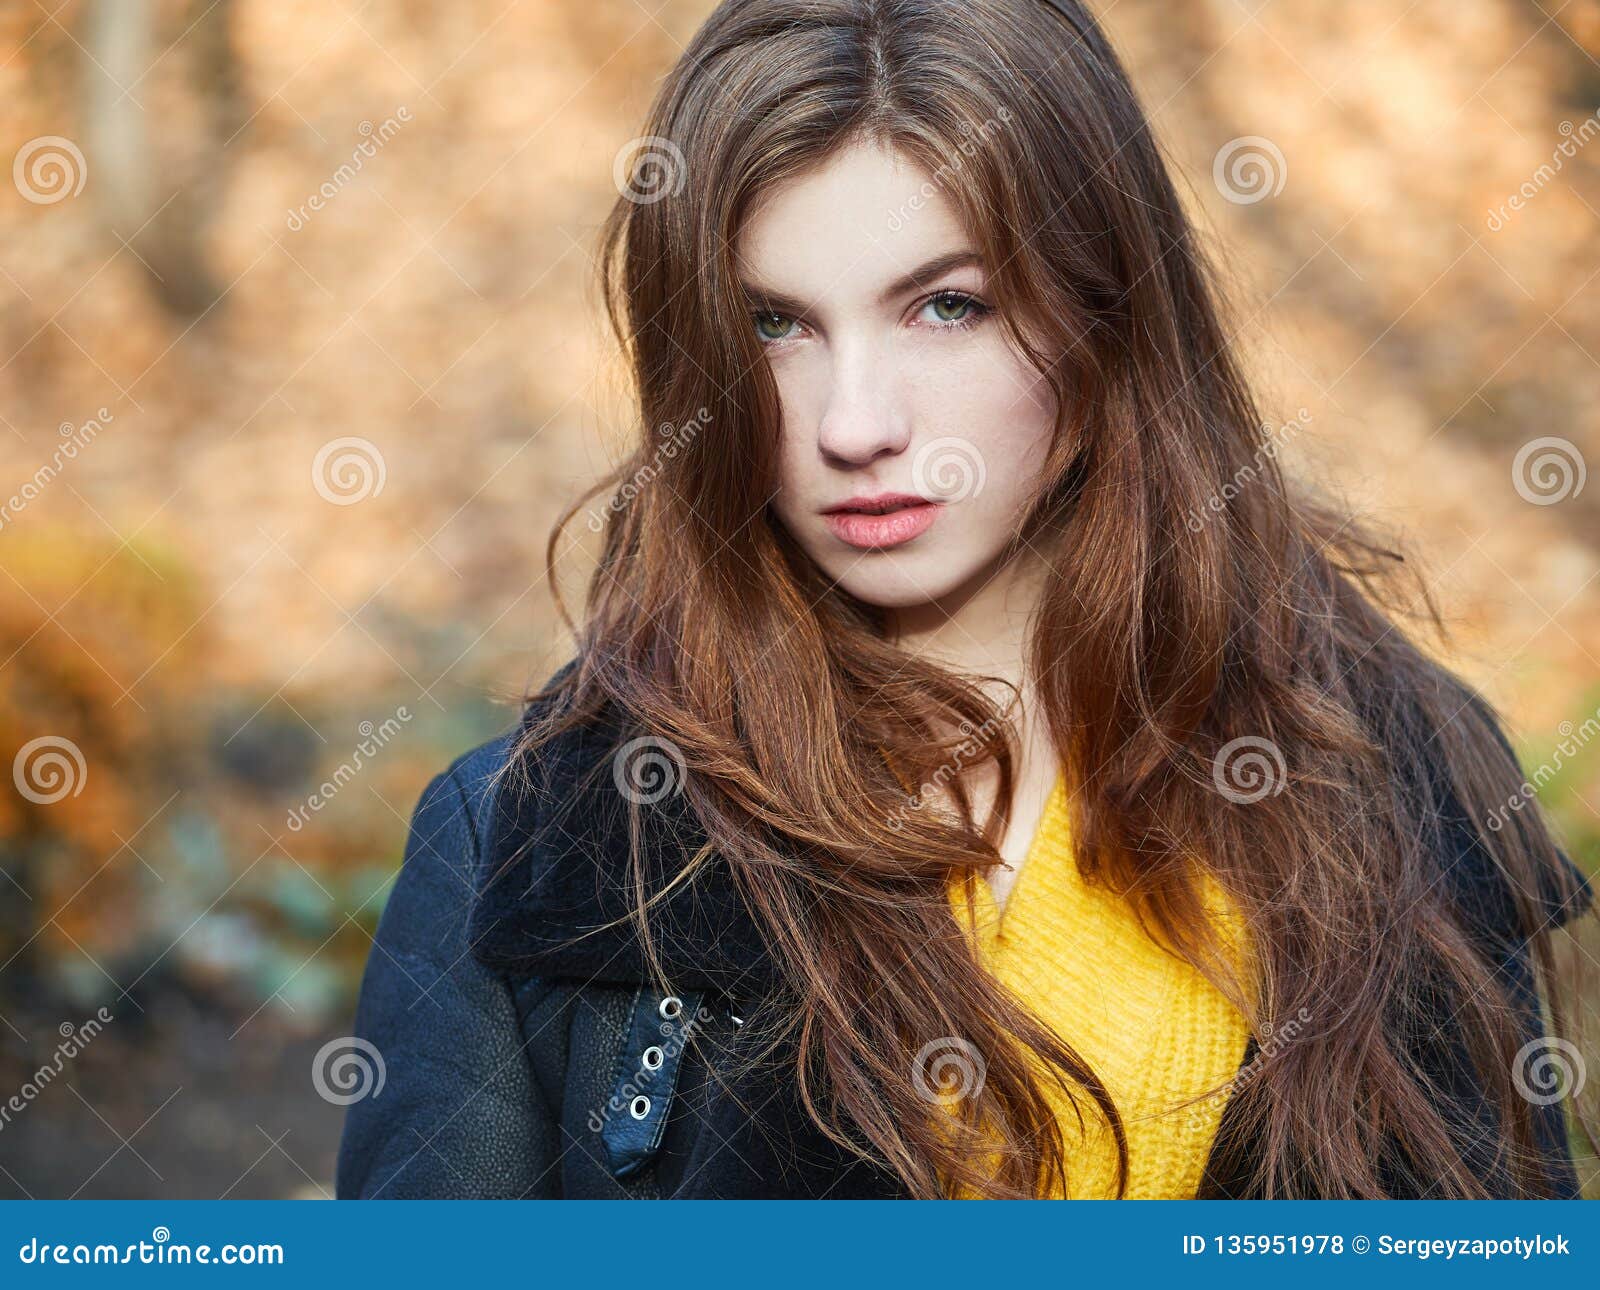 Fabulous Redhead Woman with Long Hair in Yellow Sweater Black Leather ...